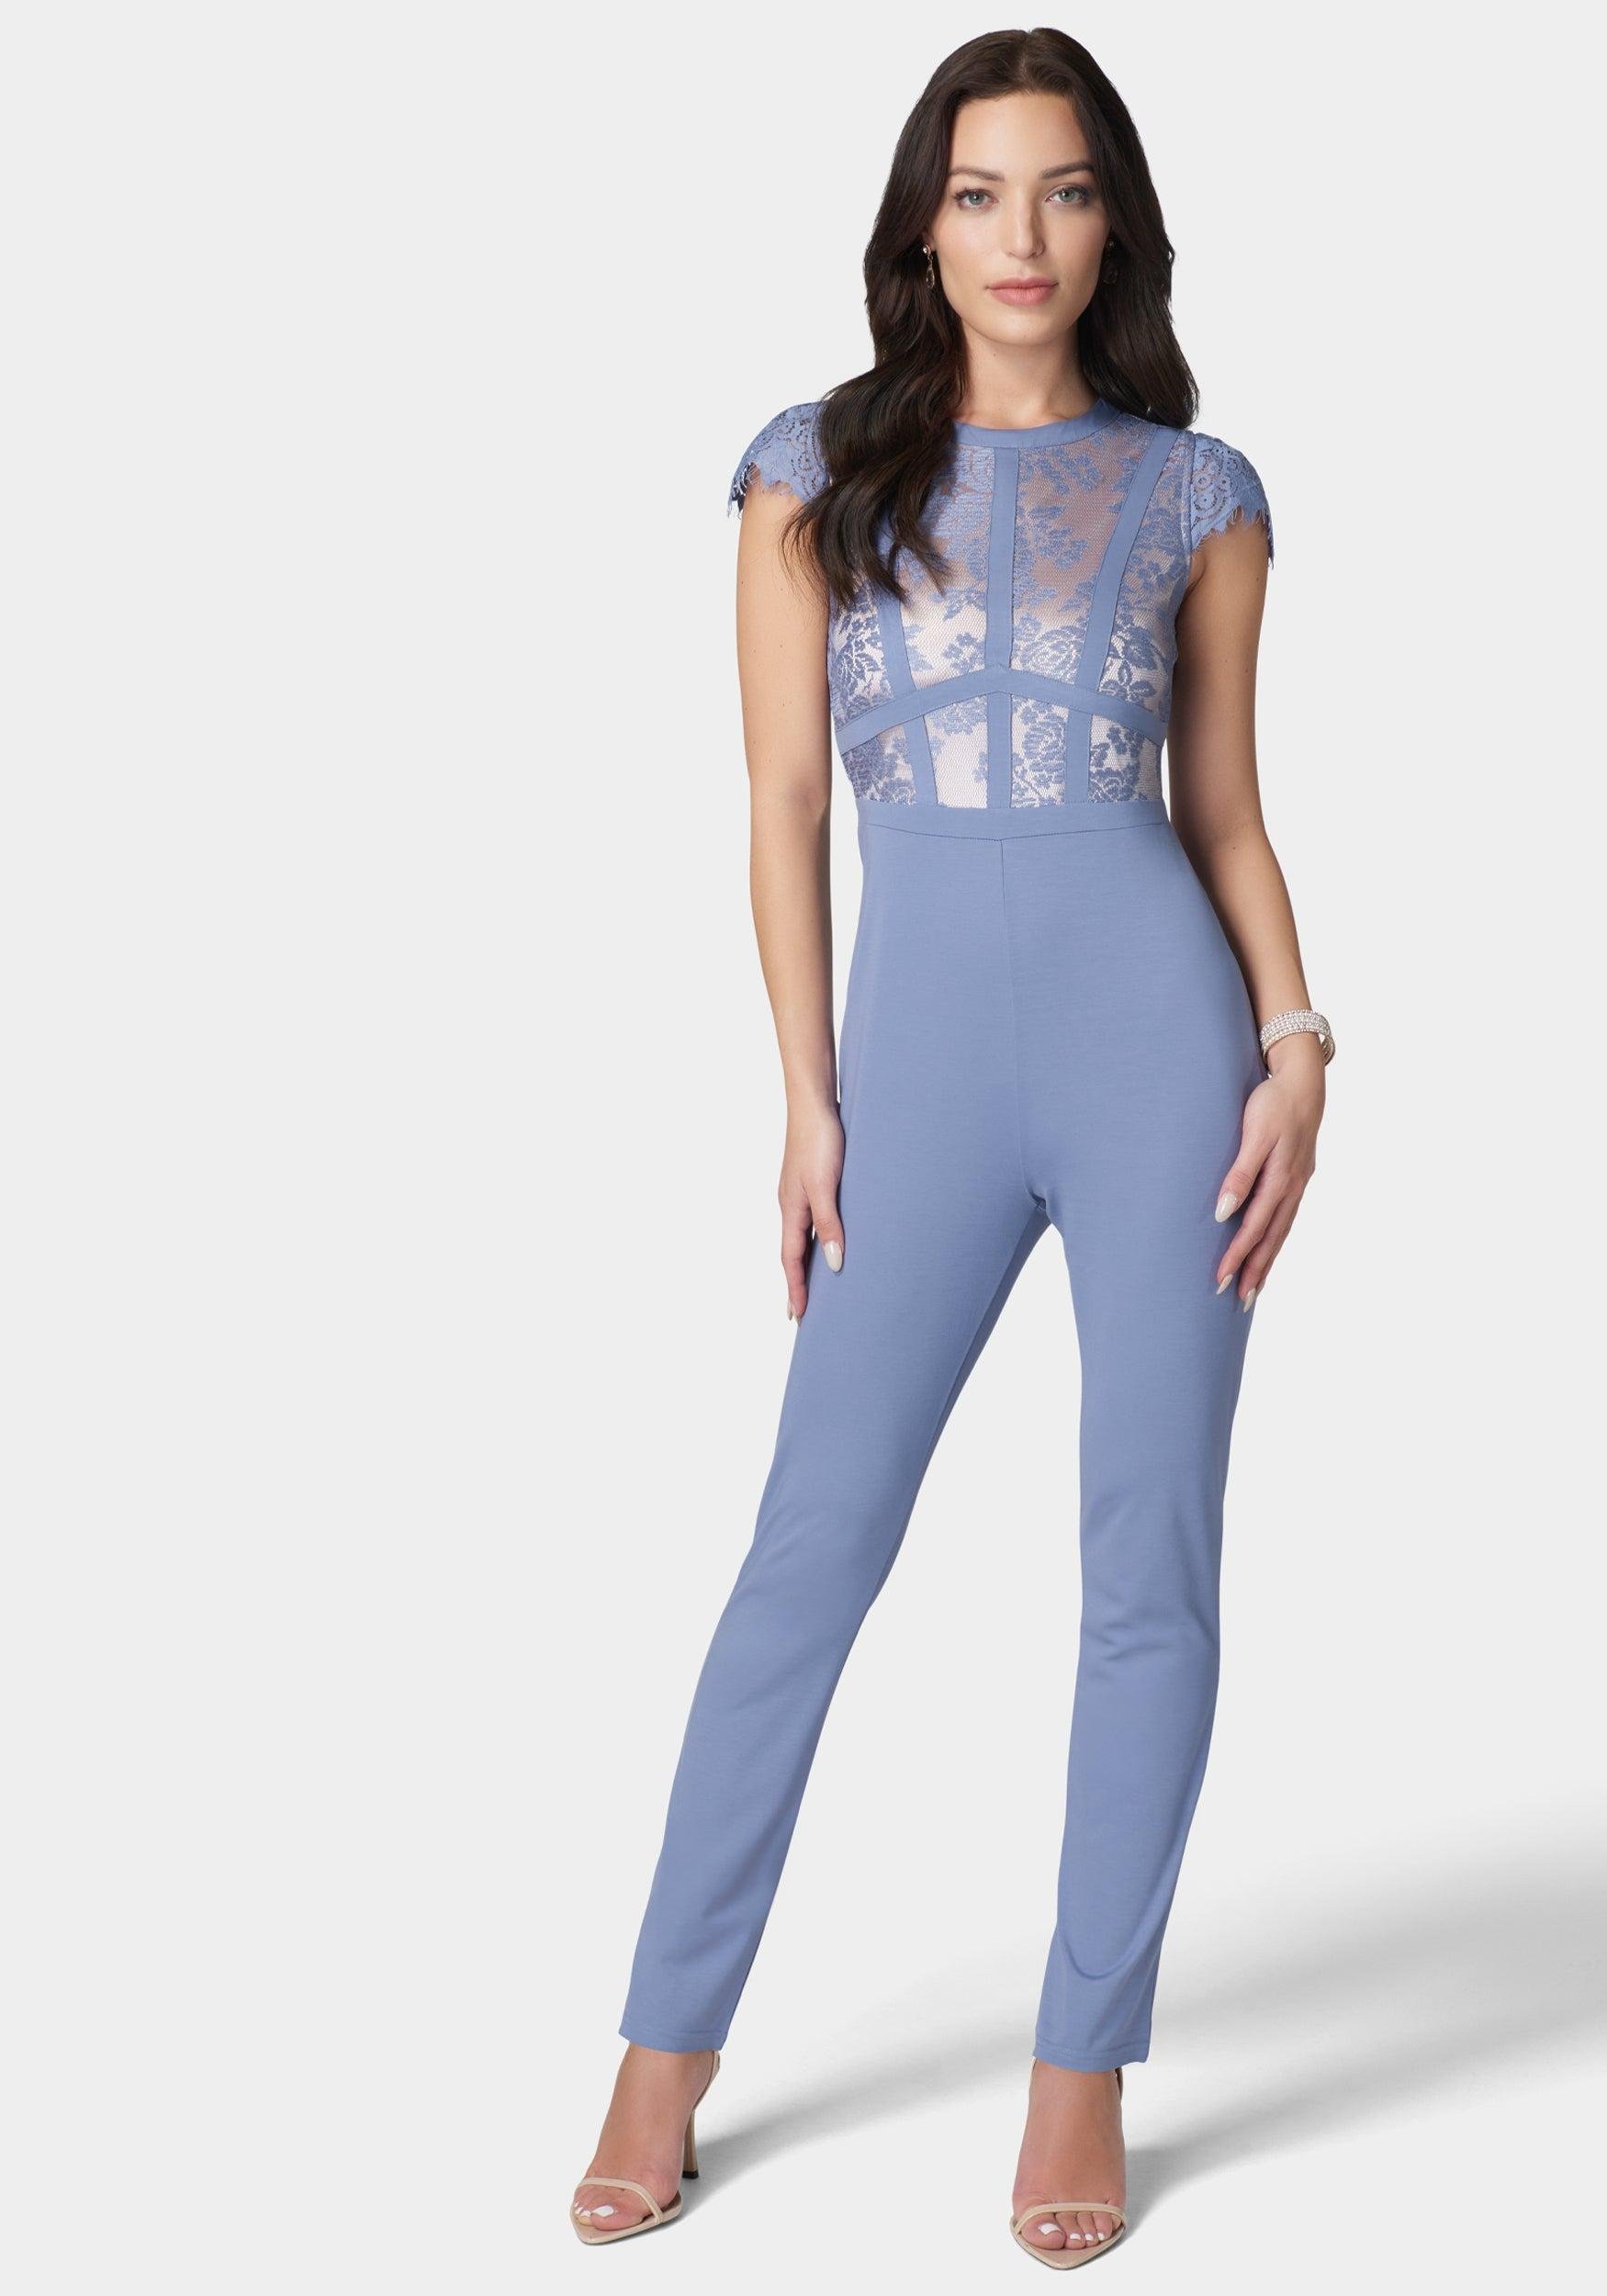 Caged Lace Catsuit by BEBE